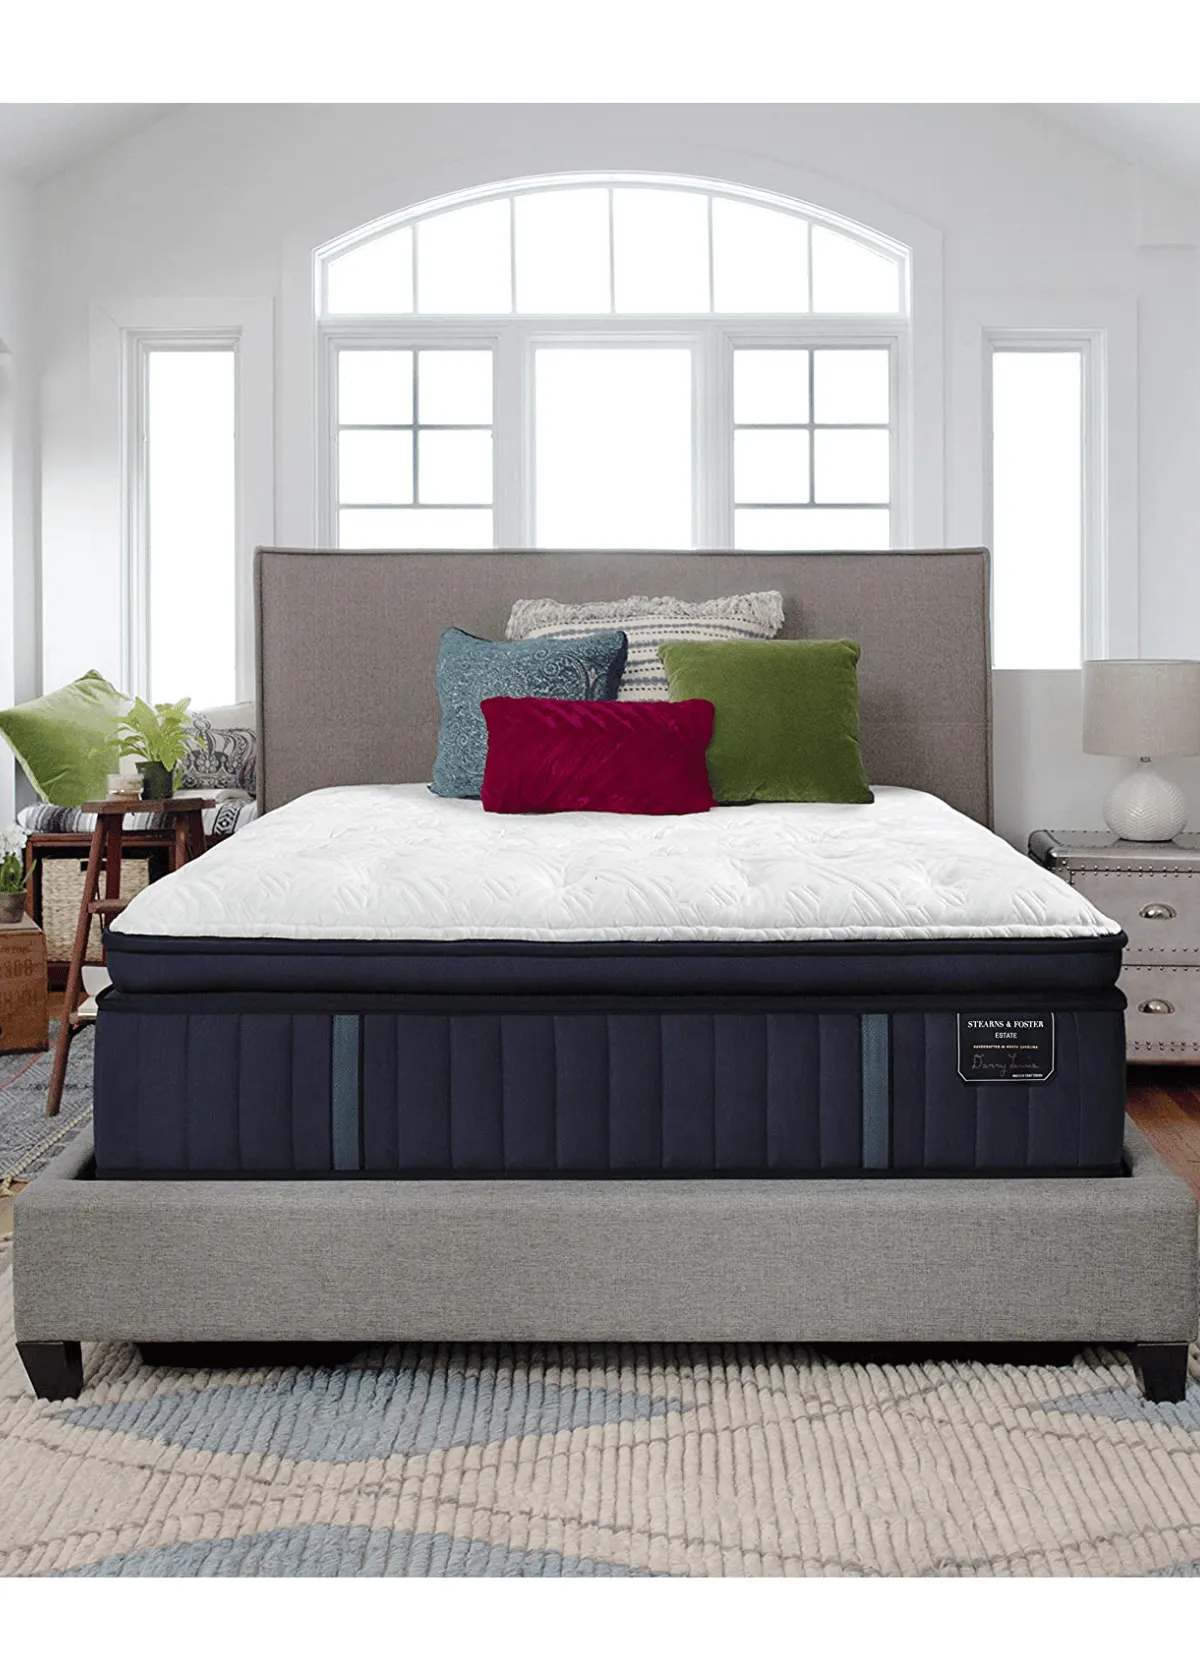 "Stearns and Foster Mattress | The Top Luxurious Beds Reviewed"